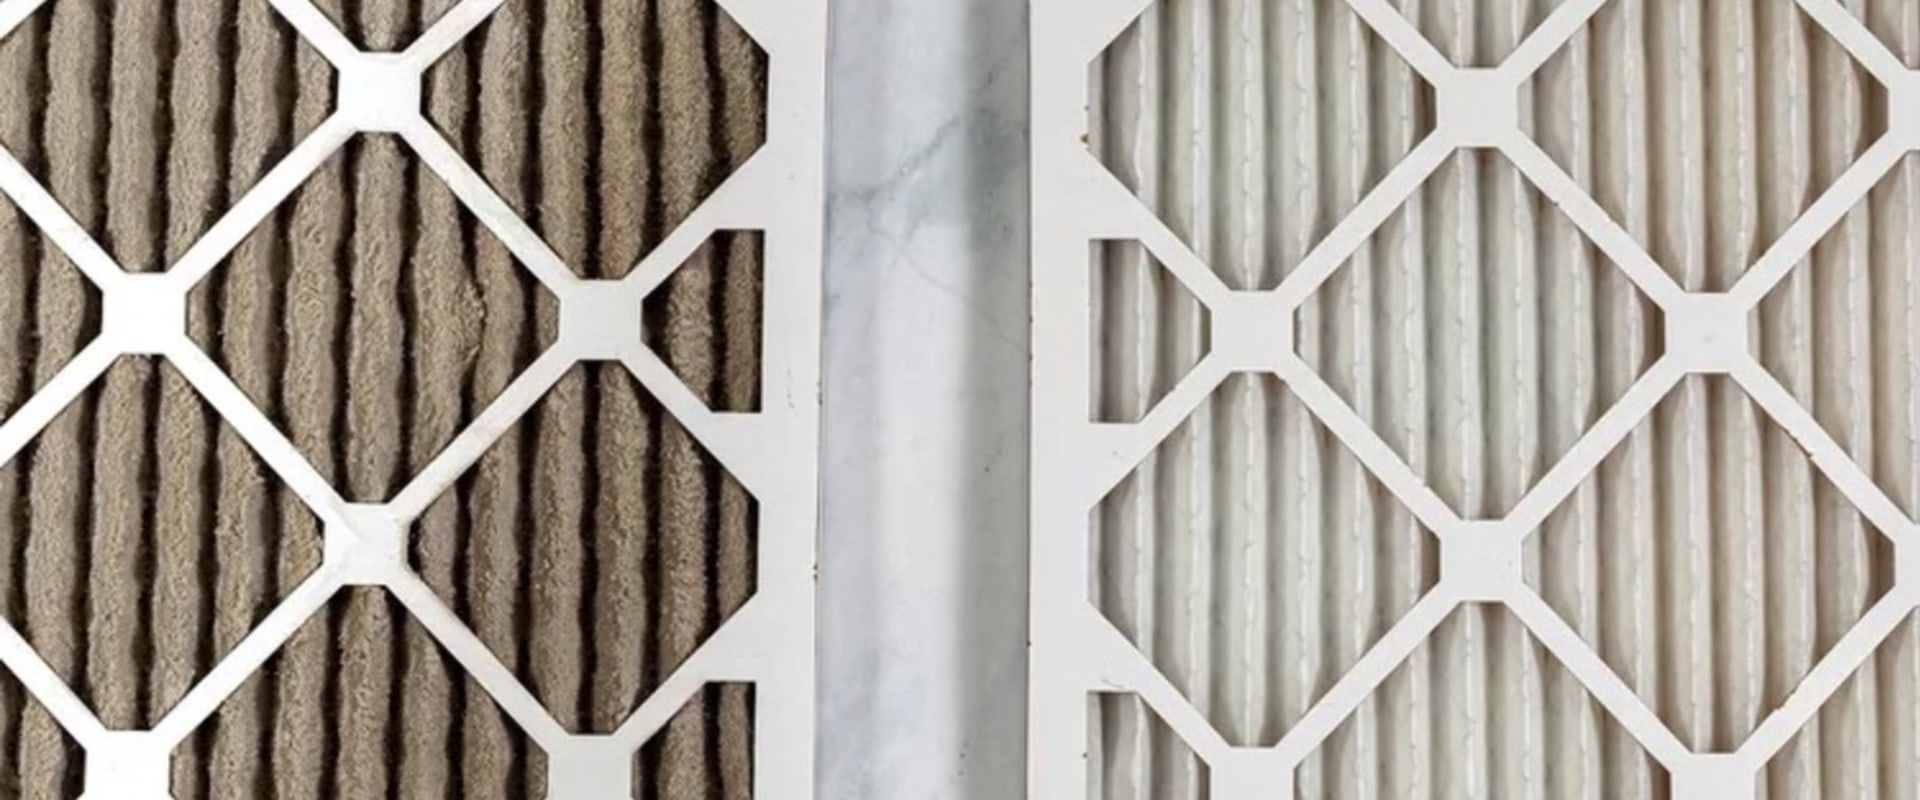 Are Air Conditioner Filters Worth It? - A Comprehensive Guide